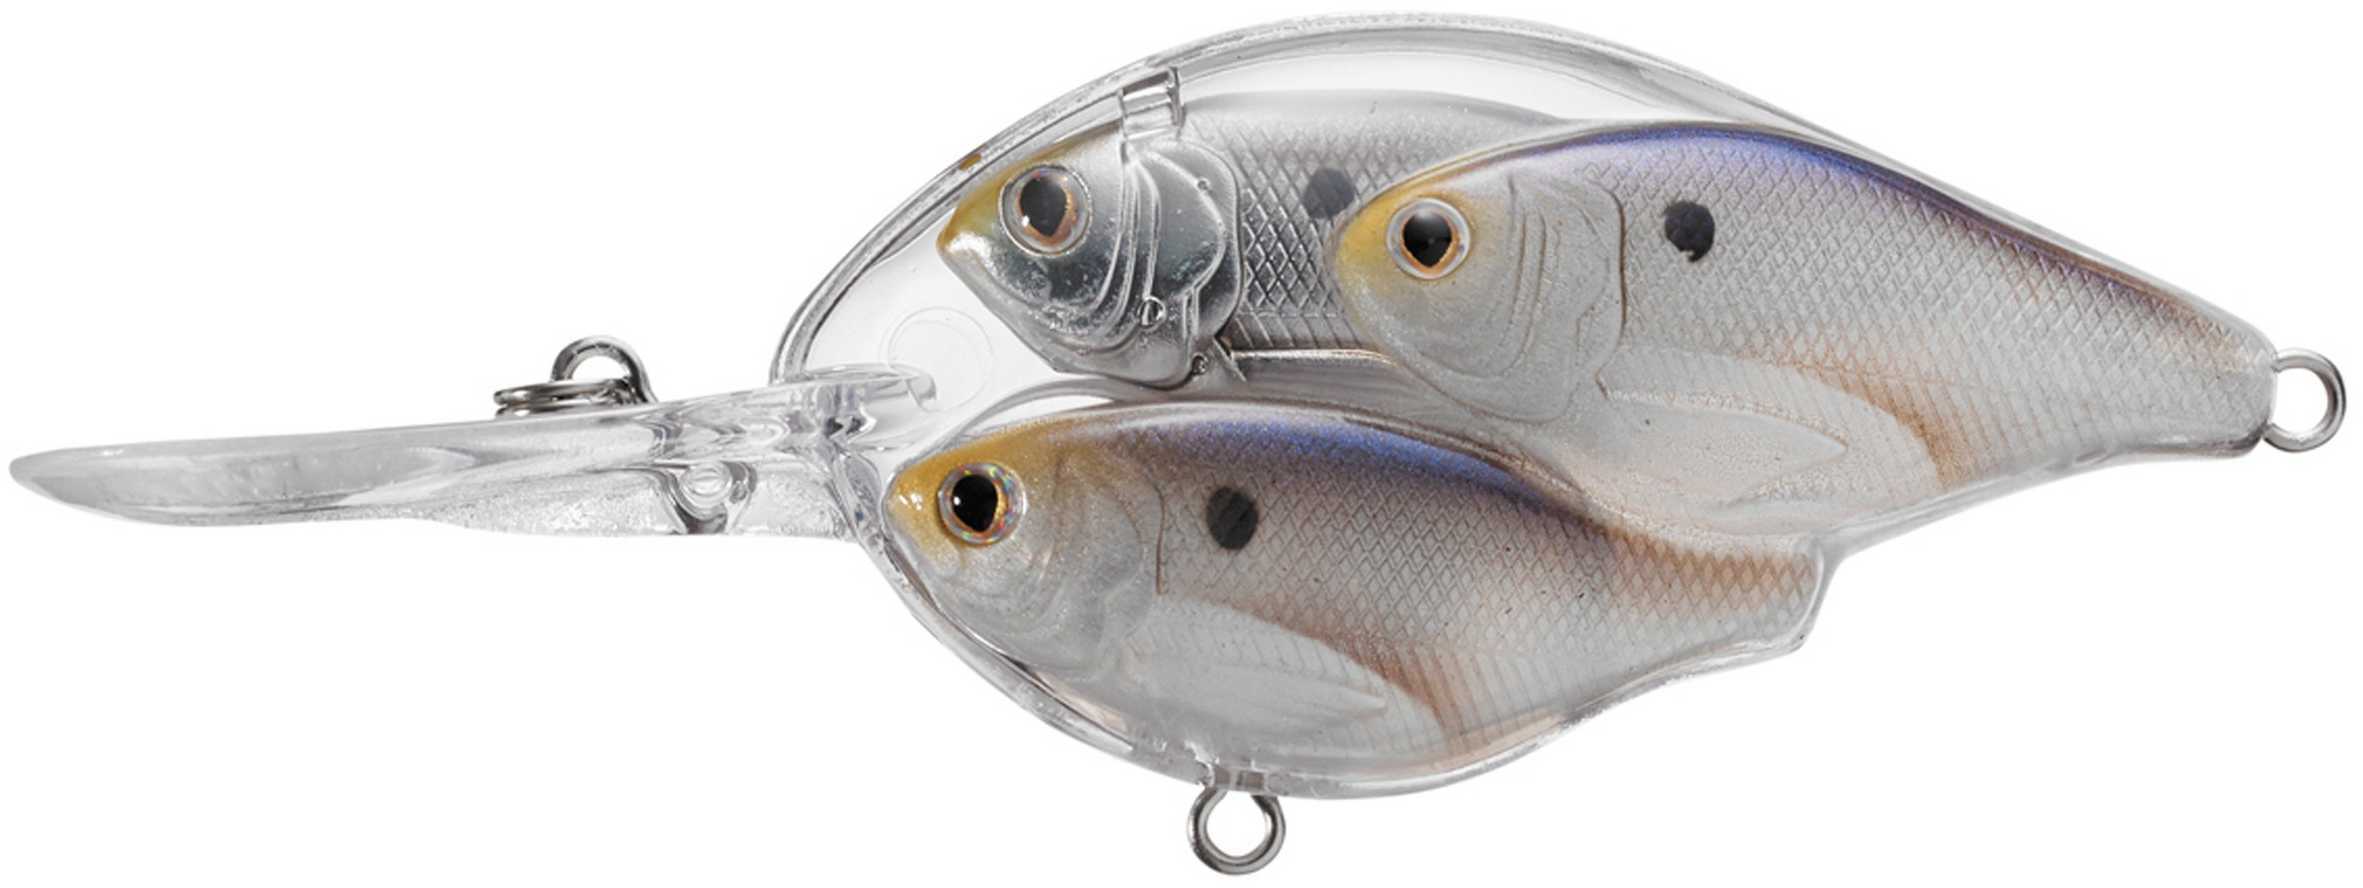 LIVETARGET Lures / Koppers Fishing and Tackle Corp Usa Baitball Threadfin Cb 5/8Oz 2 1/2In 10Ft Prl/Grey TSB65M-804